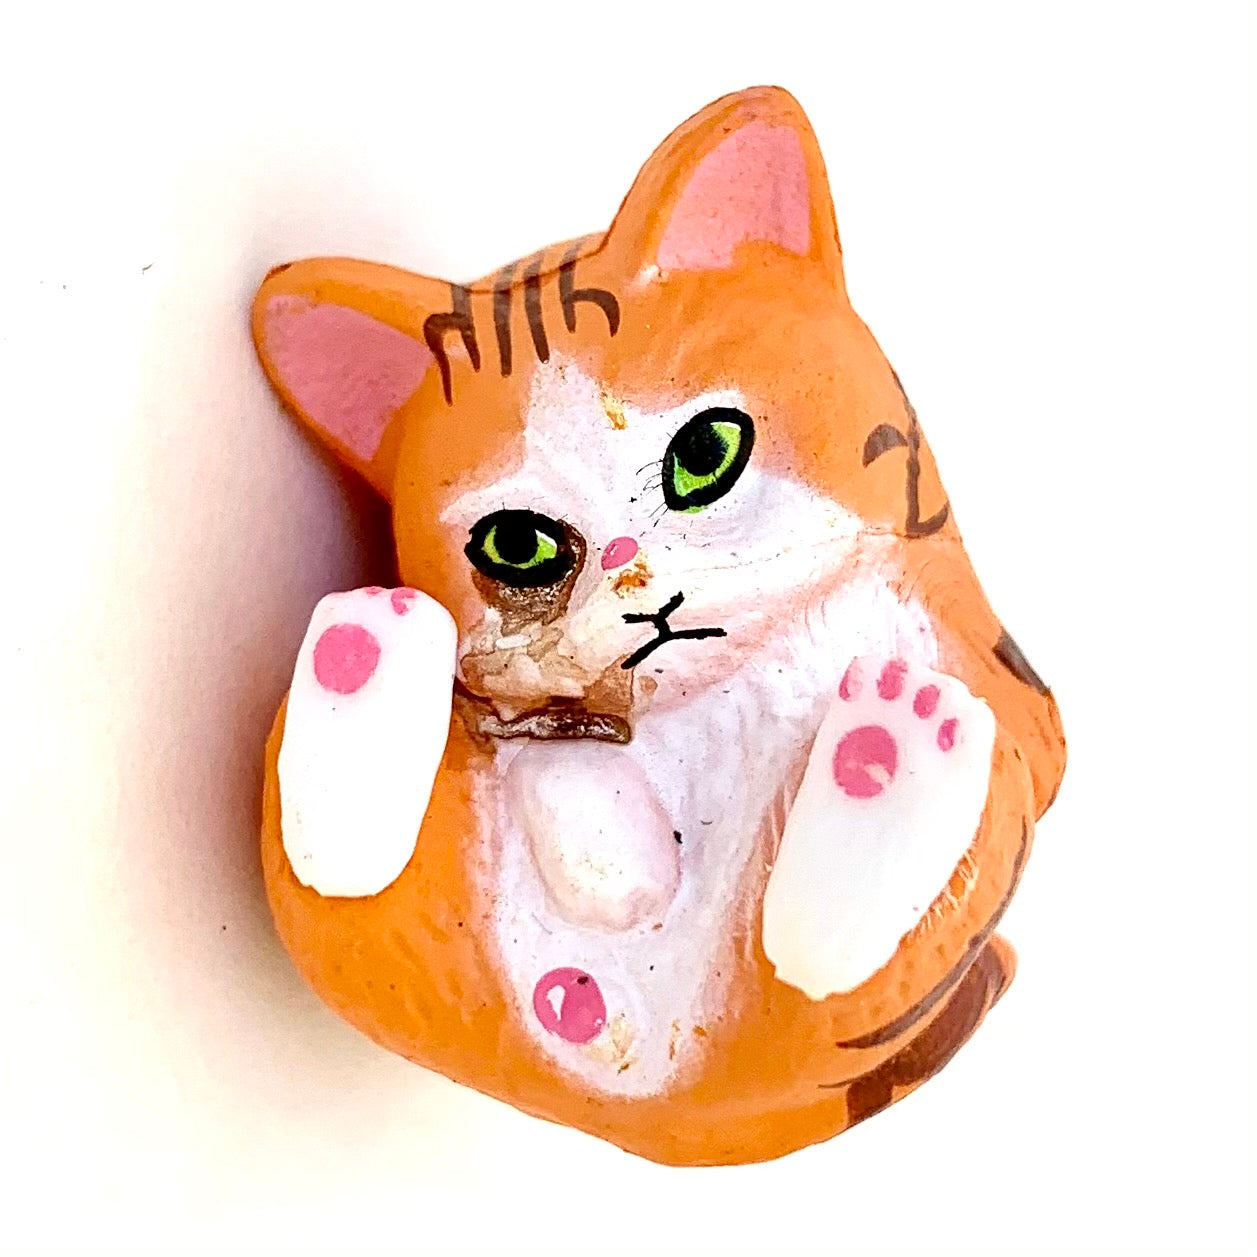 X 70893 CURLING CATS FIGURINES-DISCONTINUED